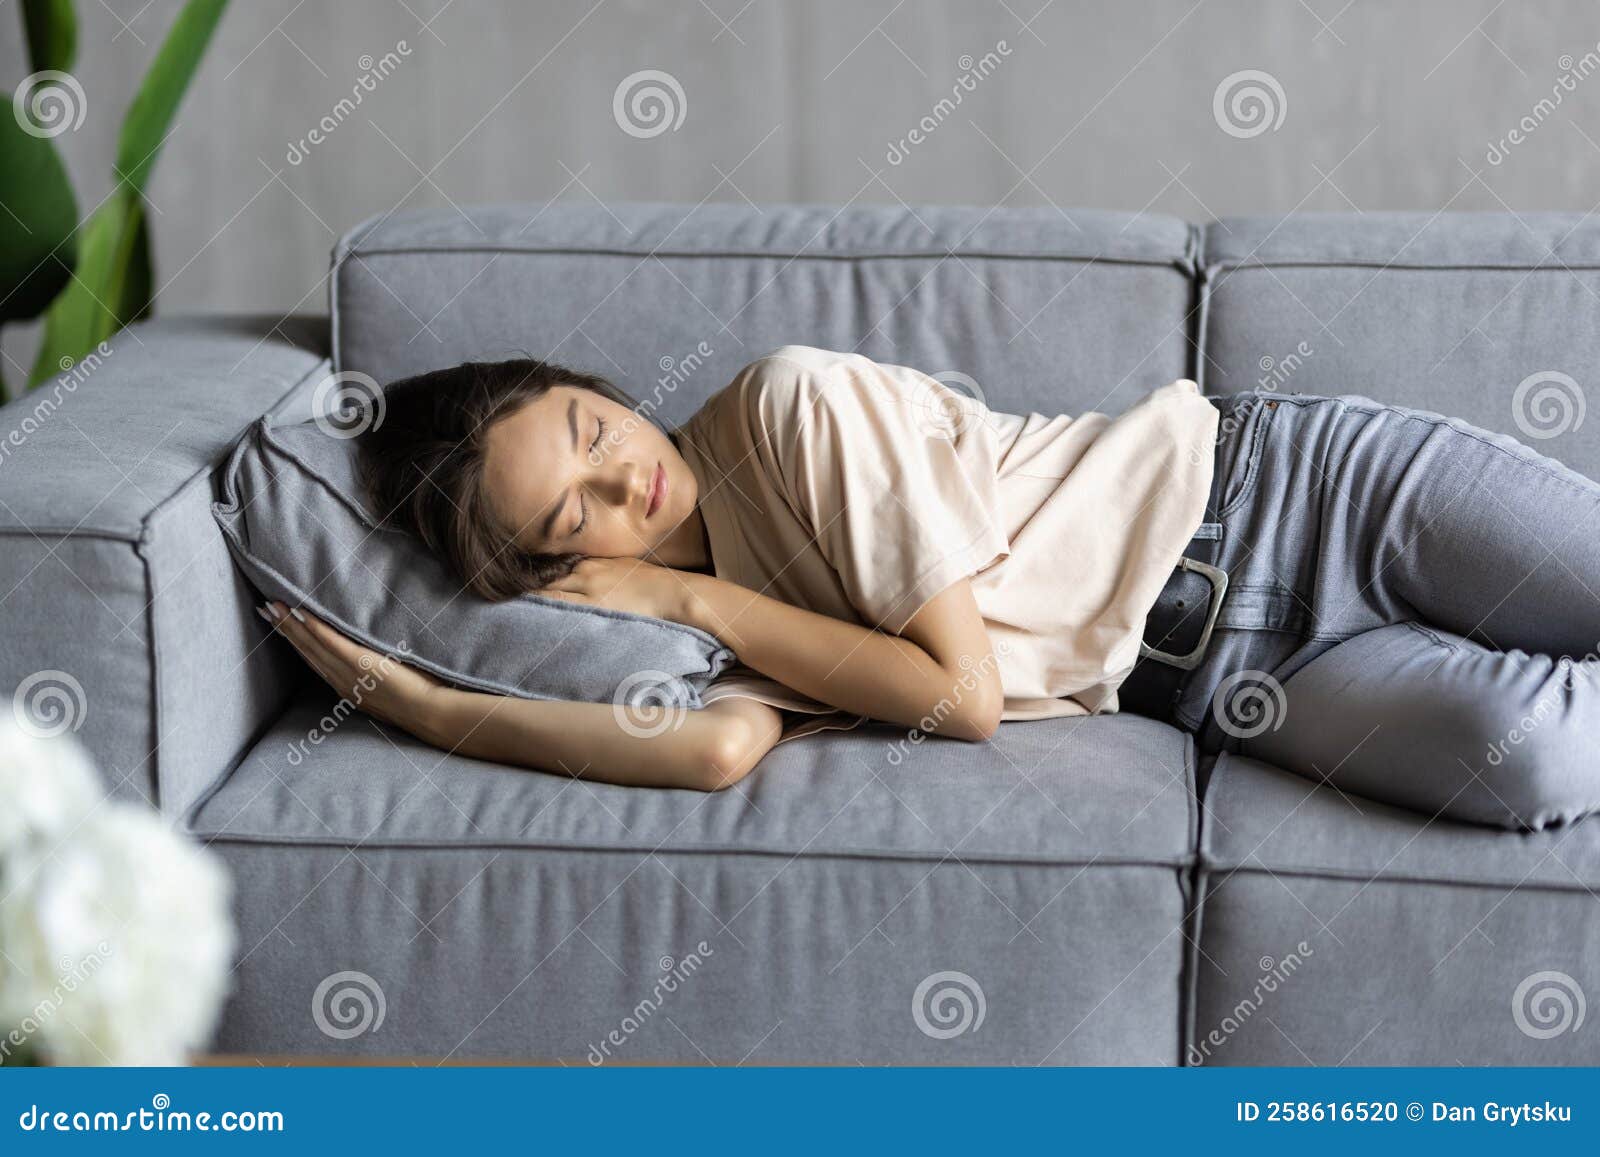 Young Attractive Woman Sleeping On The Couch In The Living Room Stock